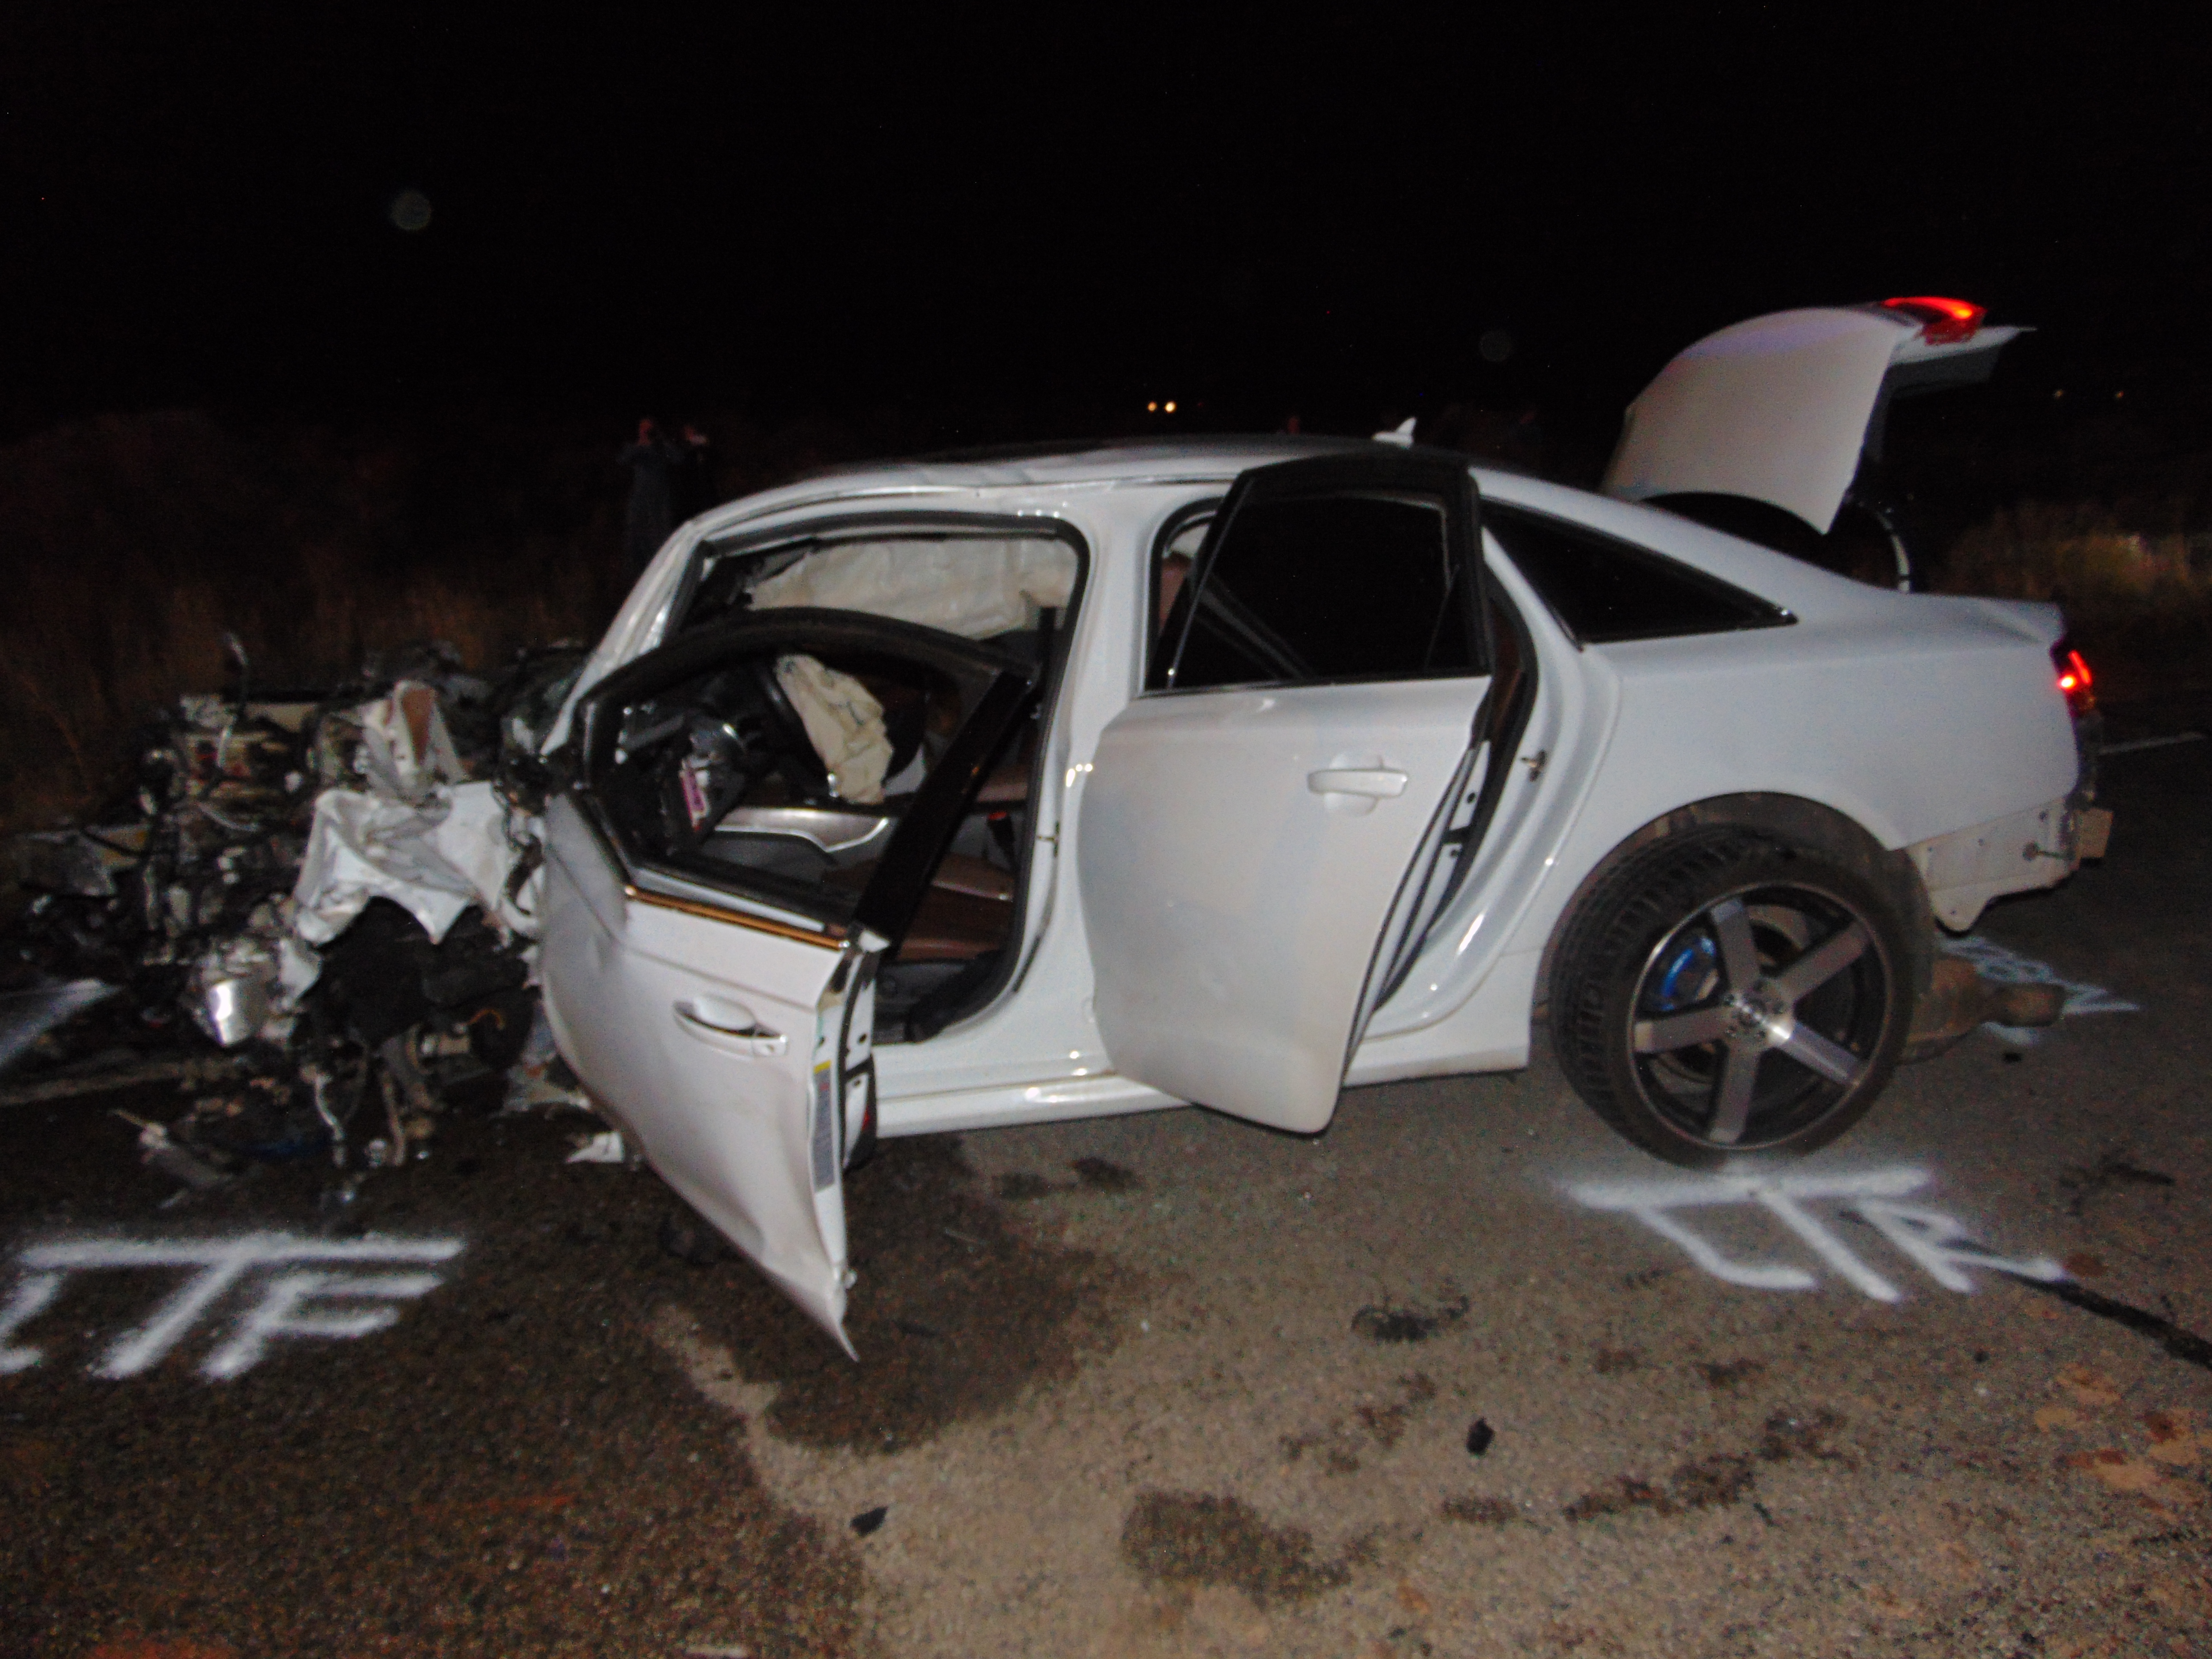 Rachel Cawley,of Centennial Park, Arizona, died in a 4-vehicle accident that started when a white Audi struck a truck it was trying to pass. Photo: Utah Department of Public Safety